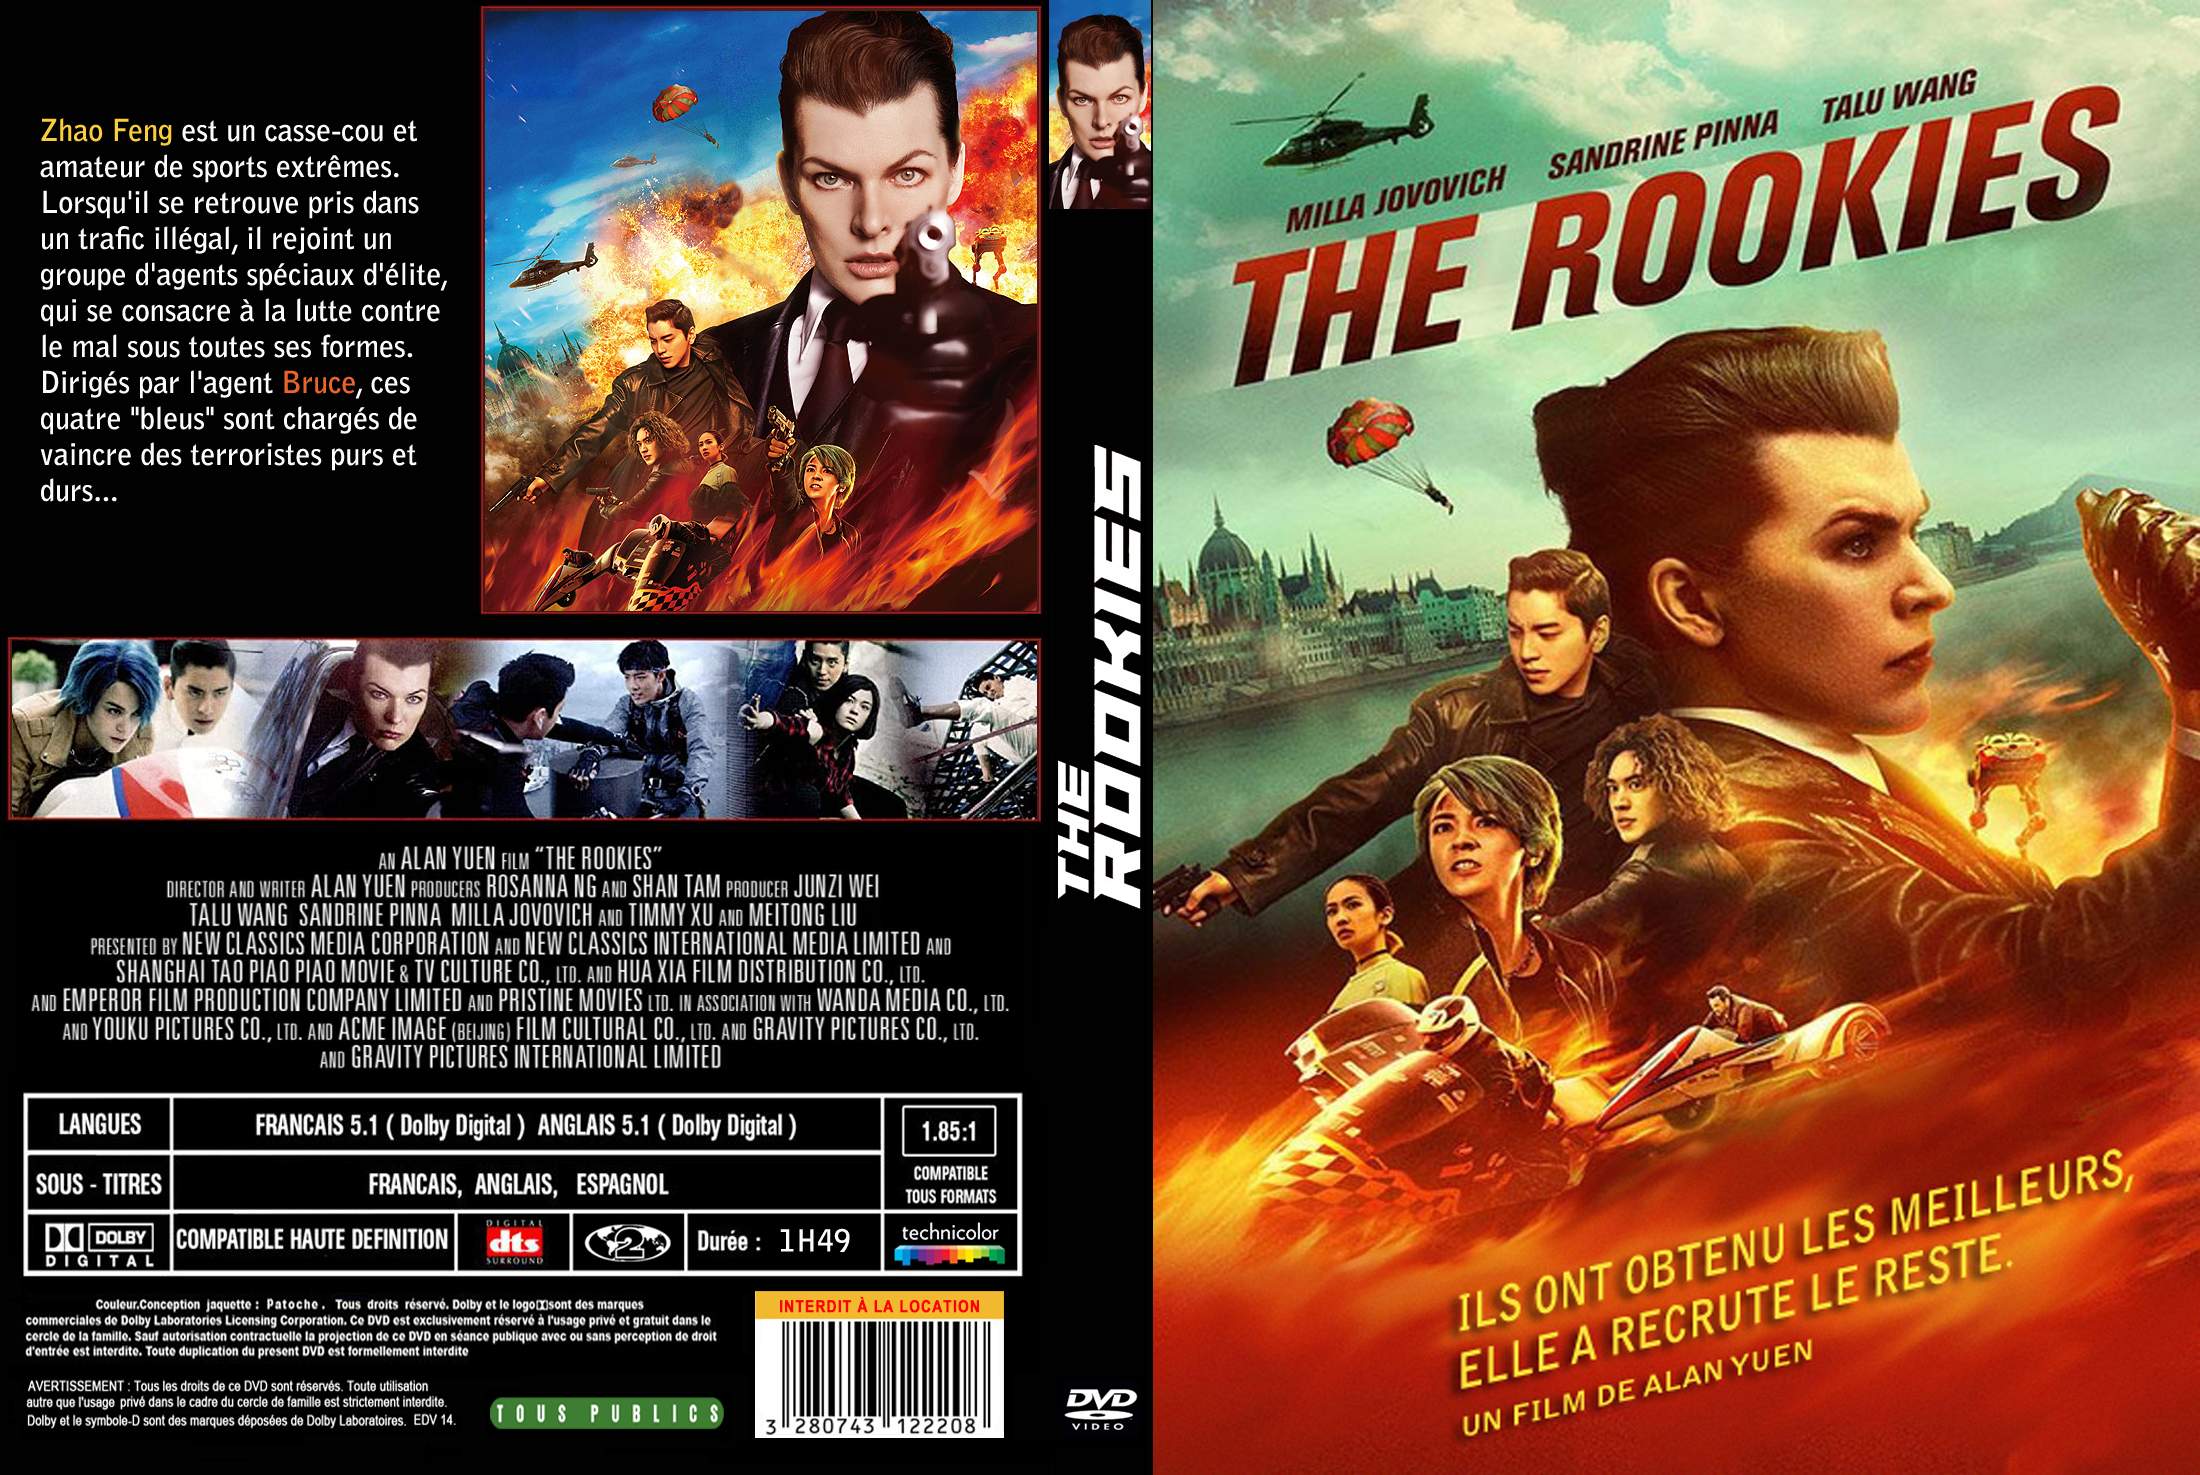 Jaquette DVD The Rookies custom